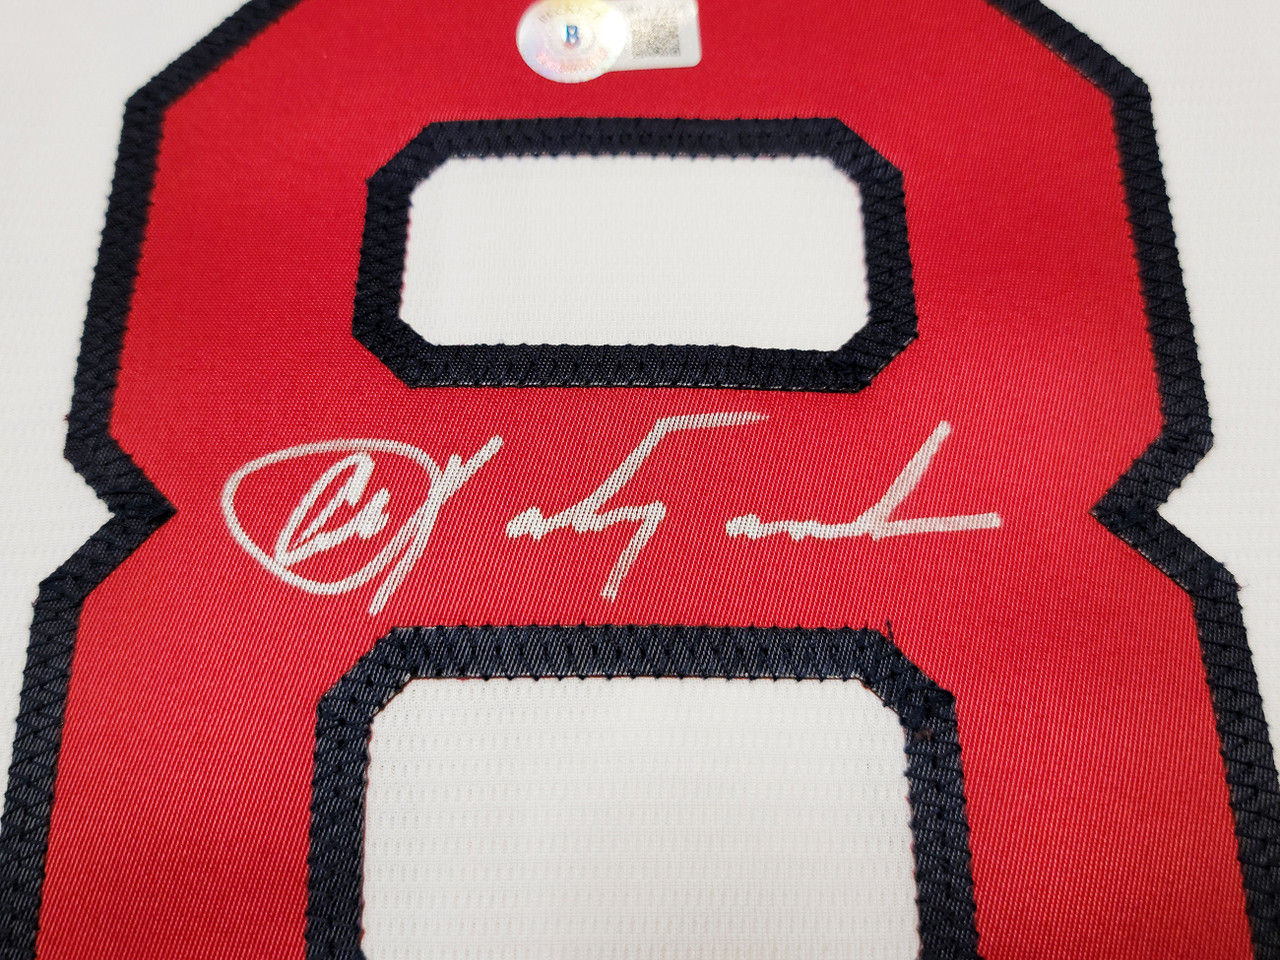 Atlanta Braves Ronald Acuna Jr. Autographed White Majestic Authentic Cool  Base Jersey Size 52 Beckett BAS Stock #206515 - Mill Creek Sports